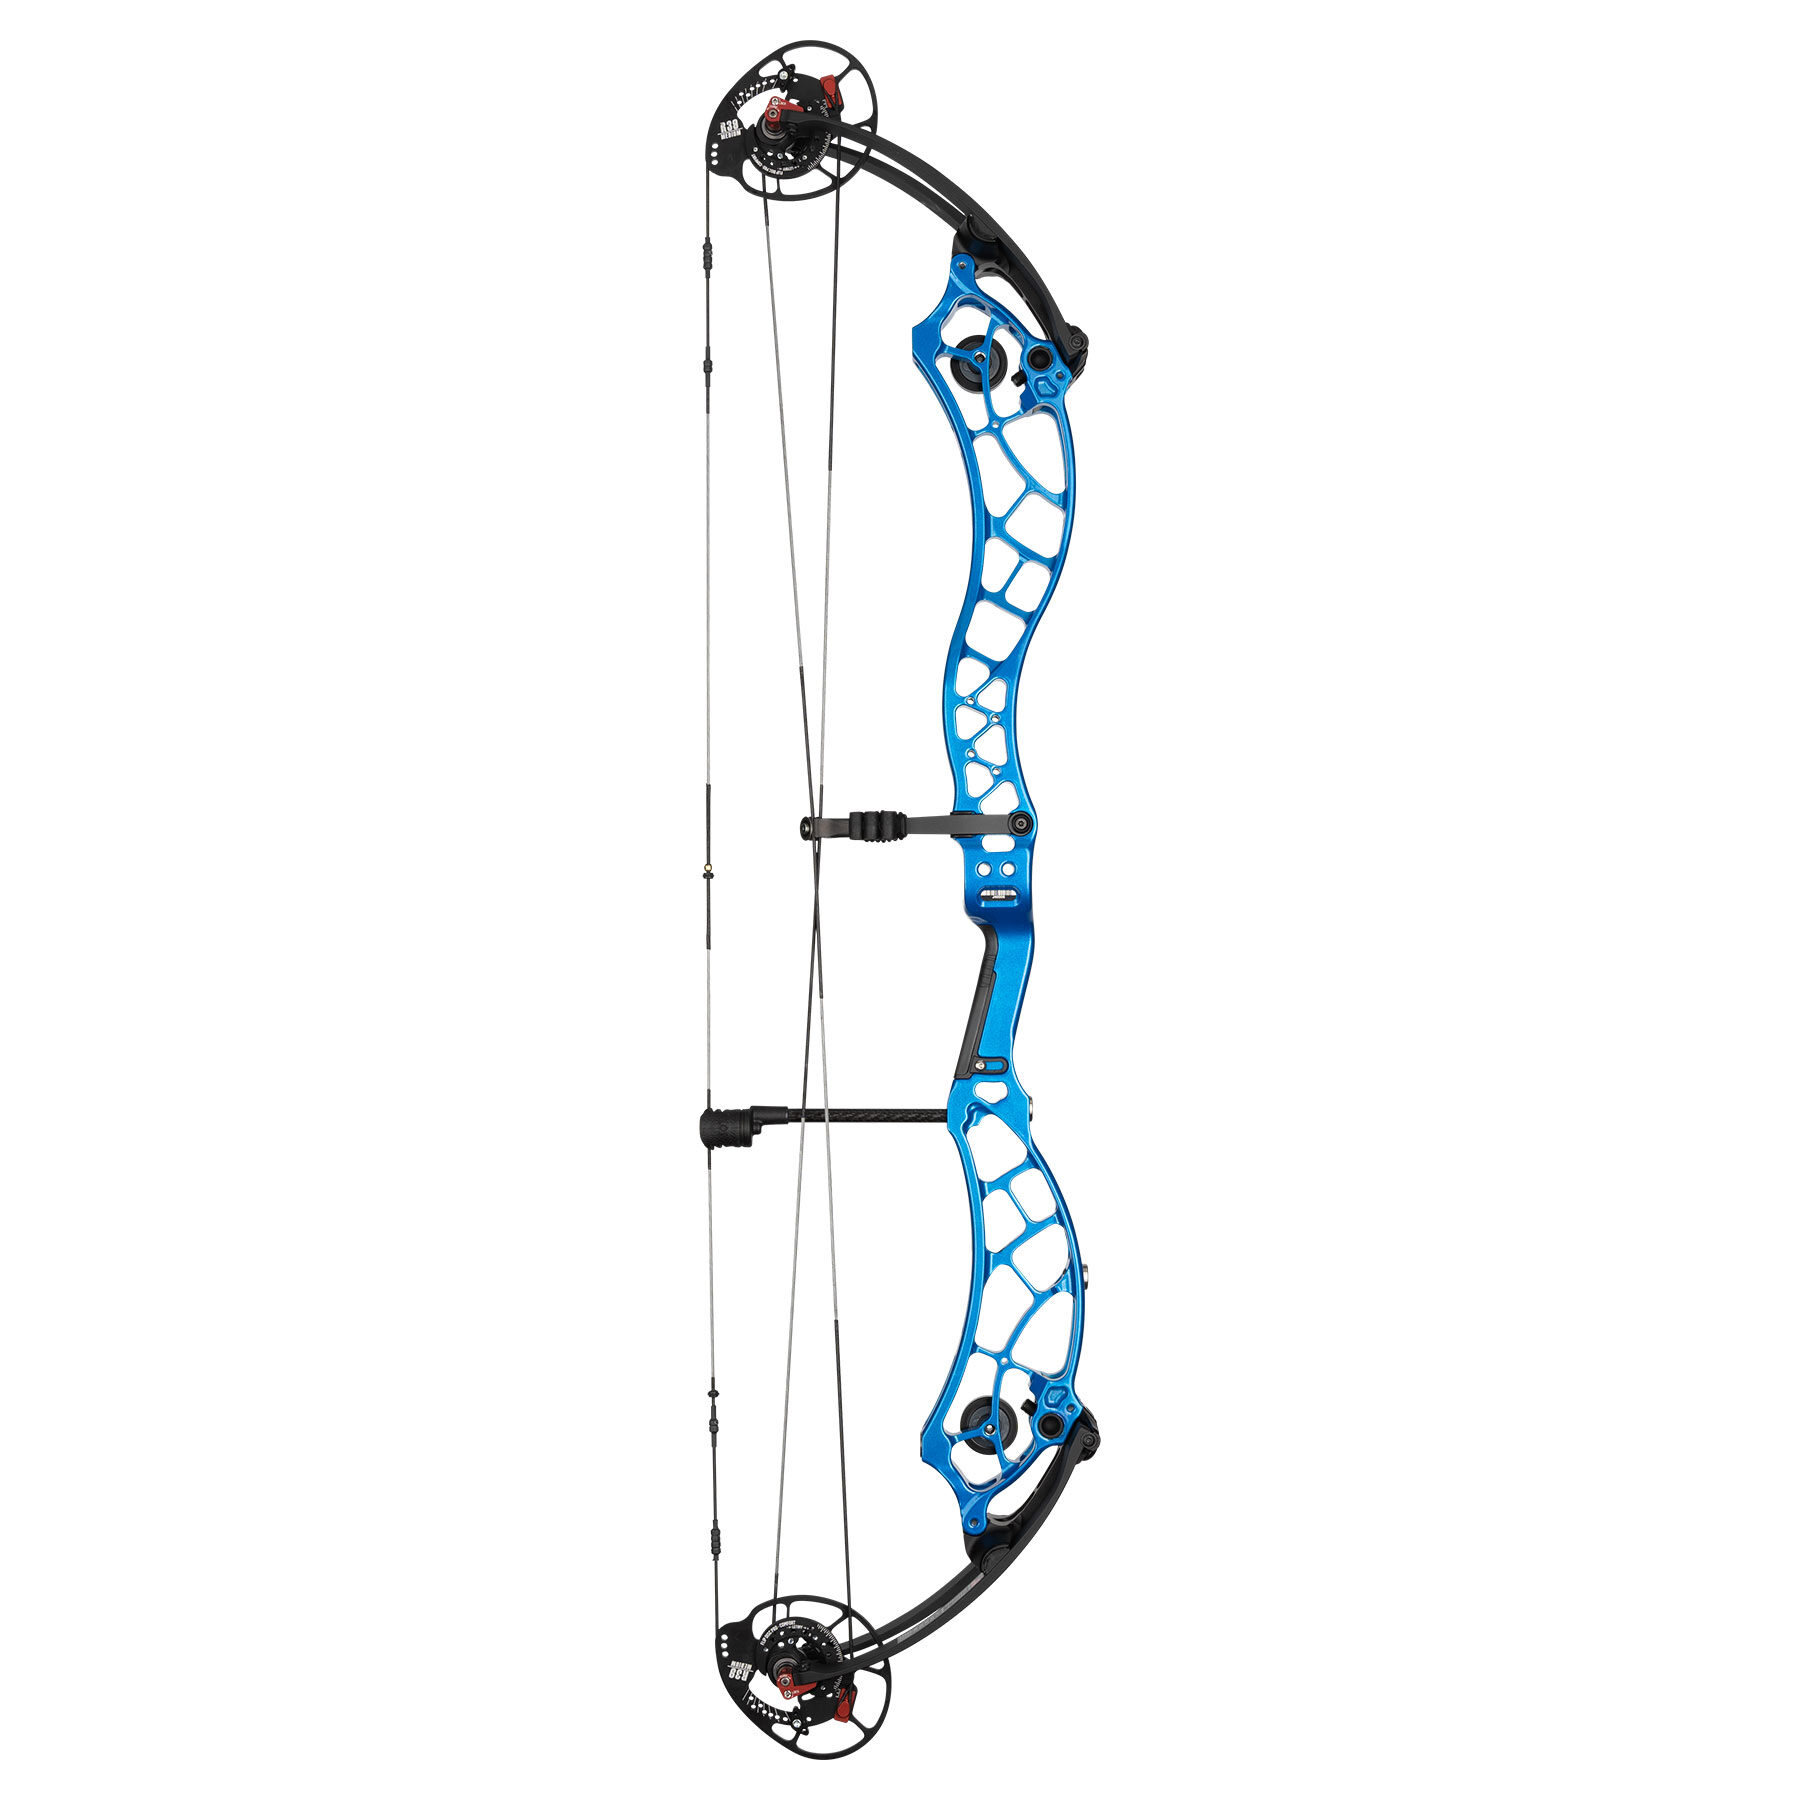 profile right of Reckoning Gen2 39 compound bow